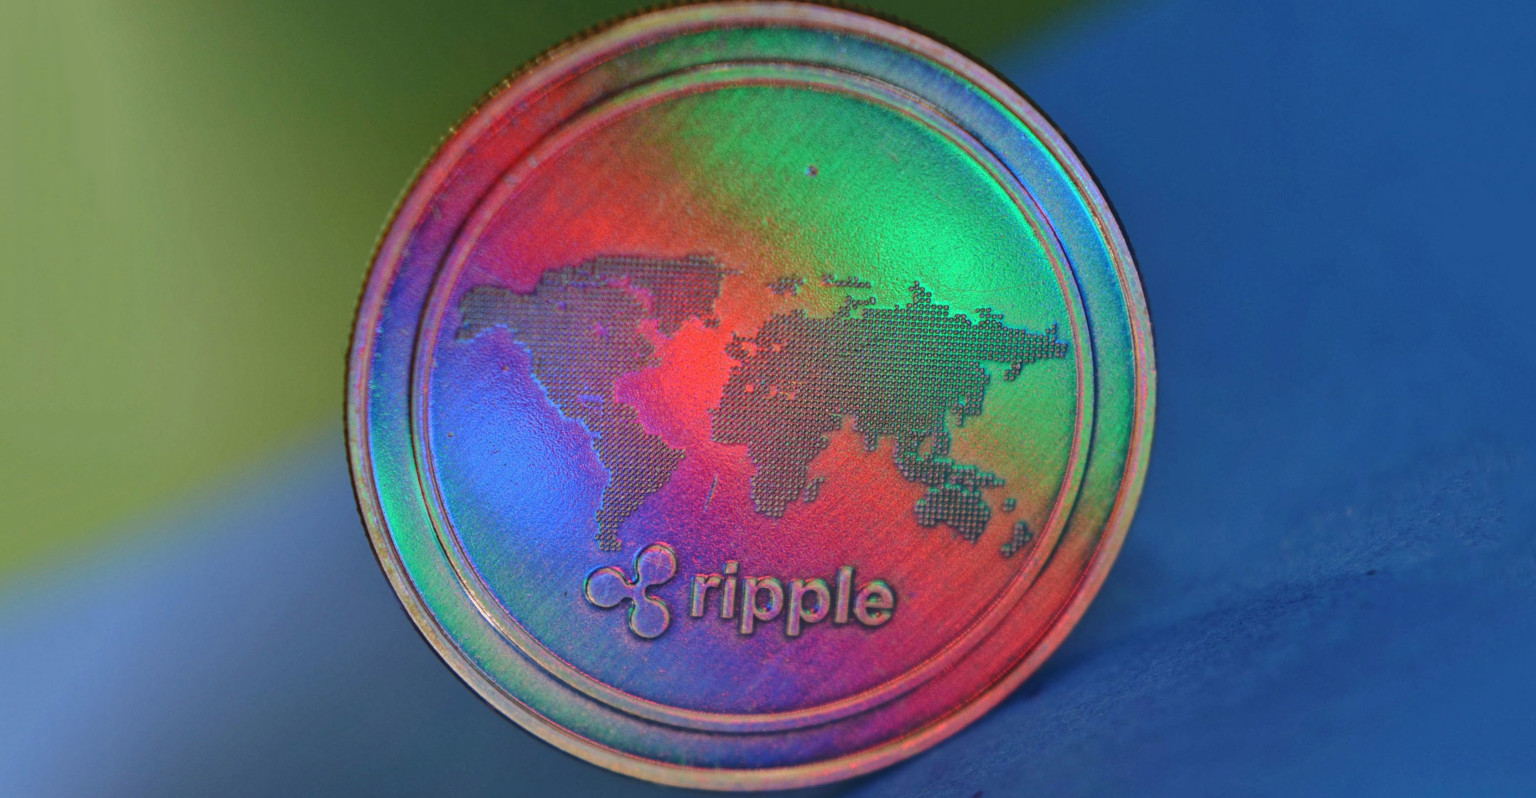 Ripple trading comes to Luno platform - TechCentral